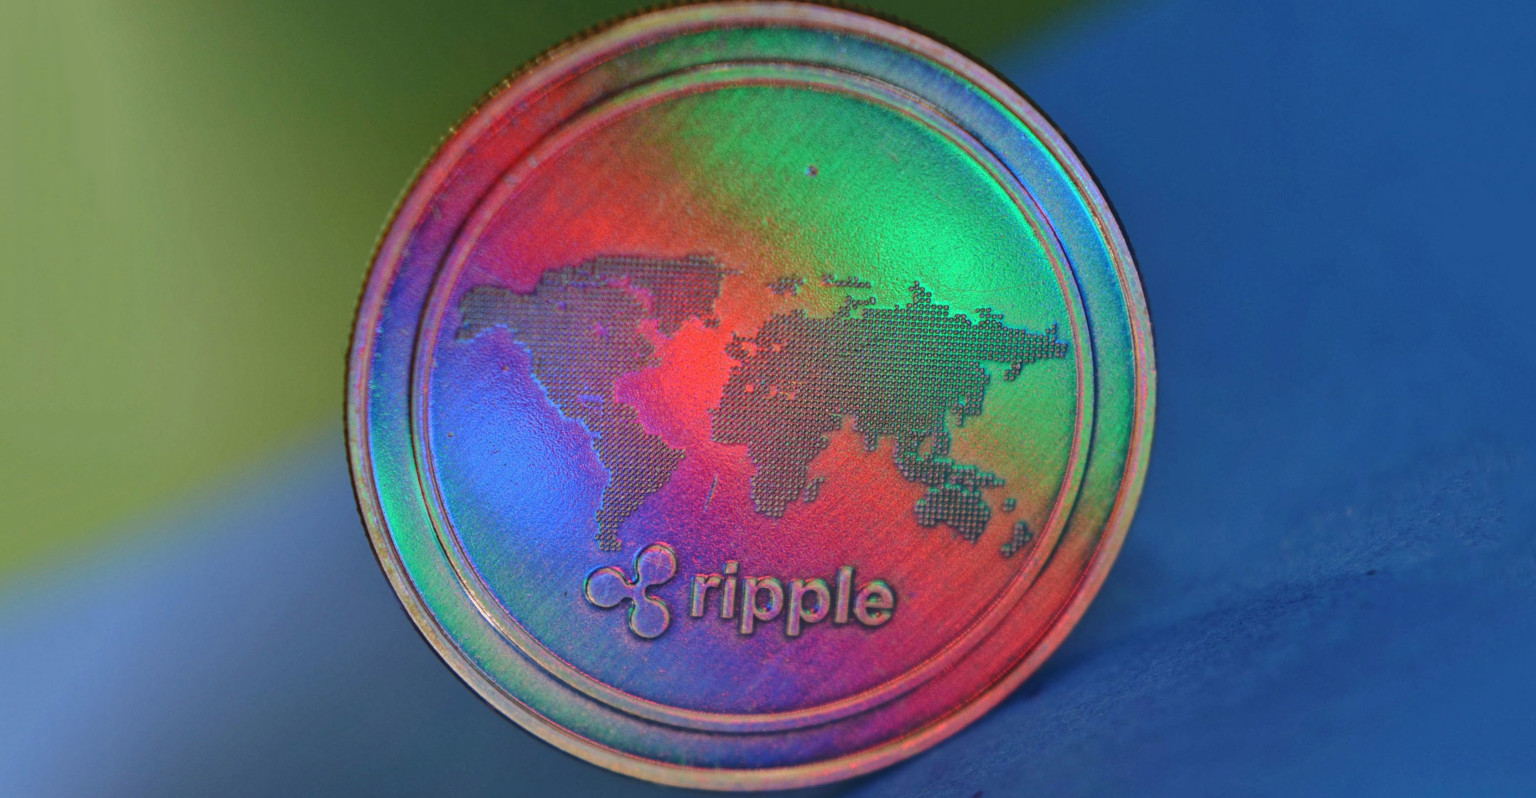 Ripple trading comes to Luno platform - TechCentral